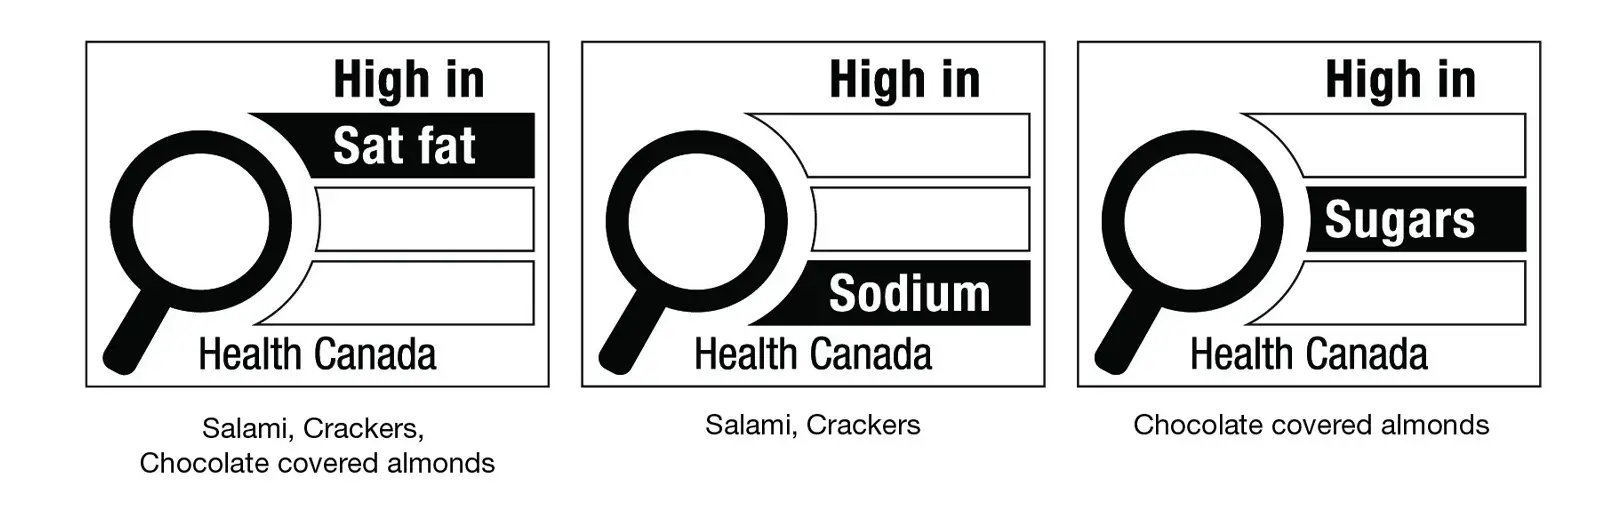 front-of-pack-warning-label-canada-cfia-mandatory-package-design-agency